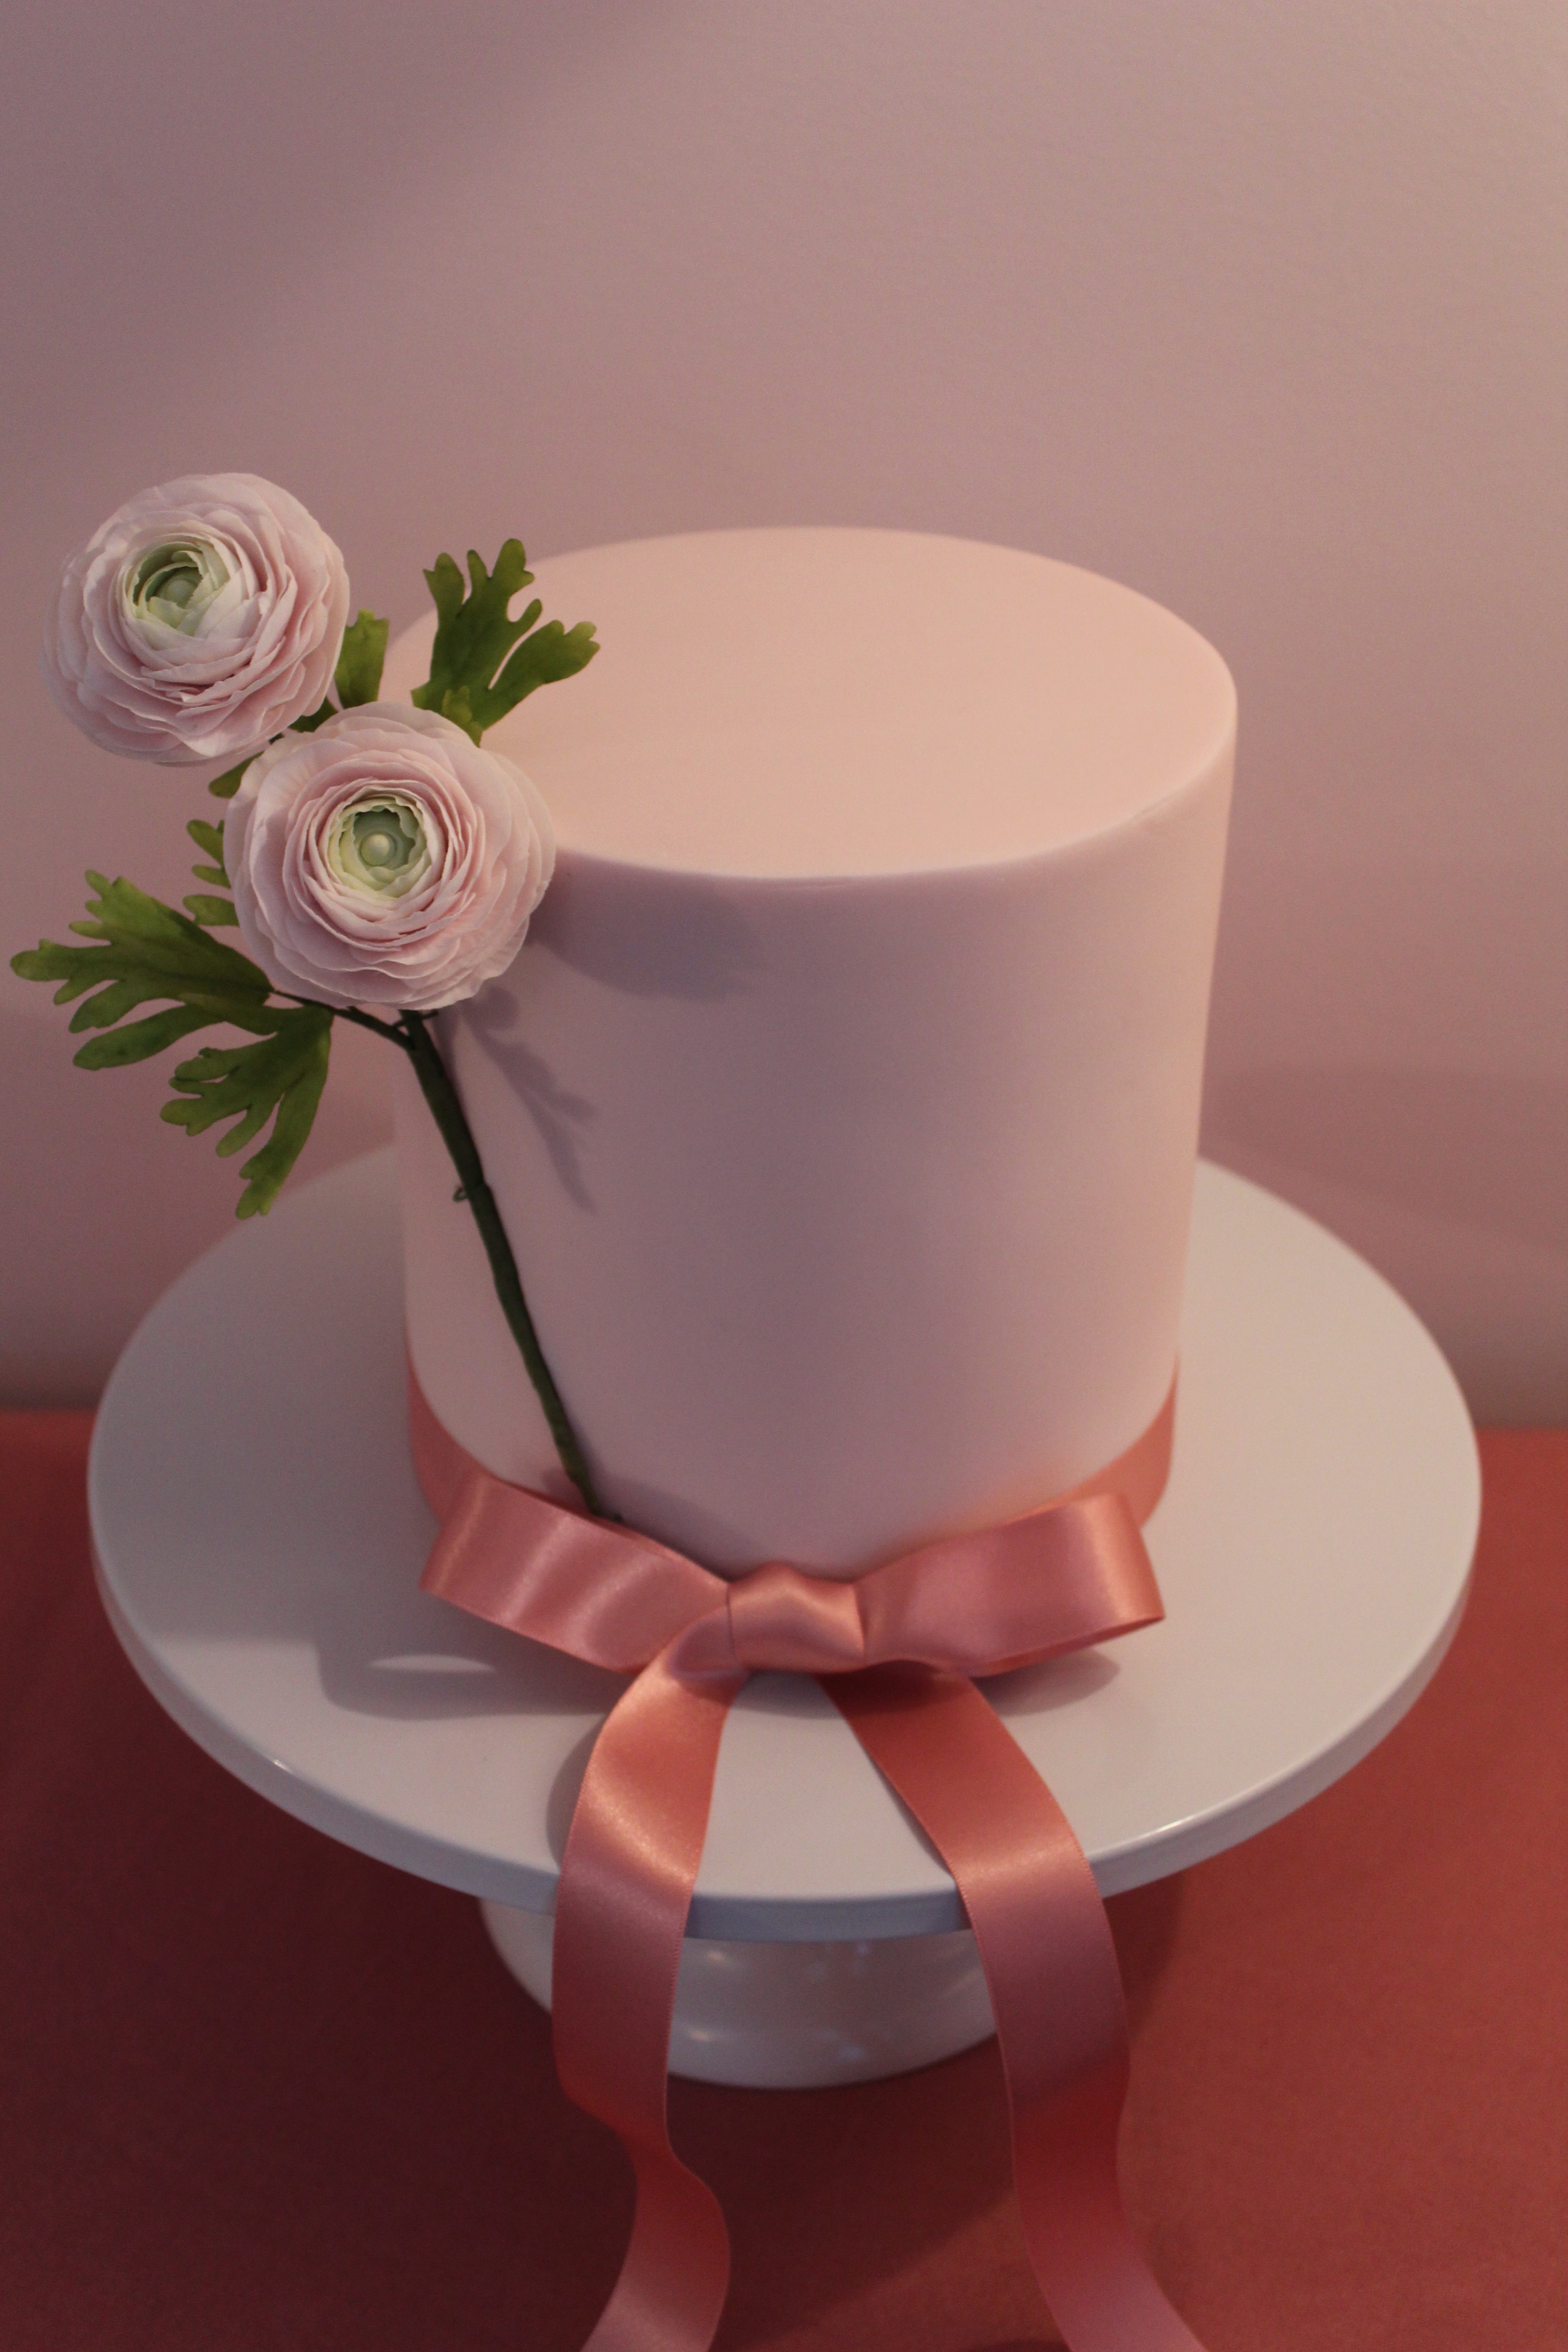 Sugar ranunculus on a rich chocolate cake with white chocolate ganache and fondant icing.